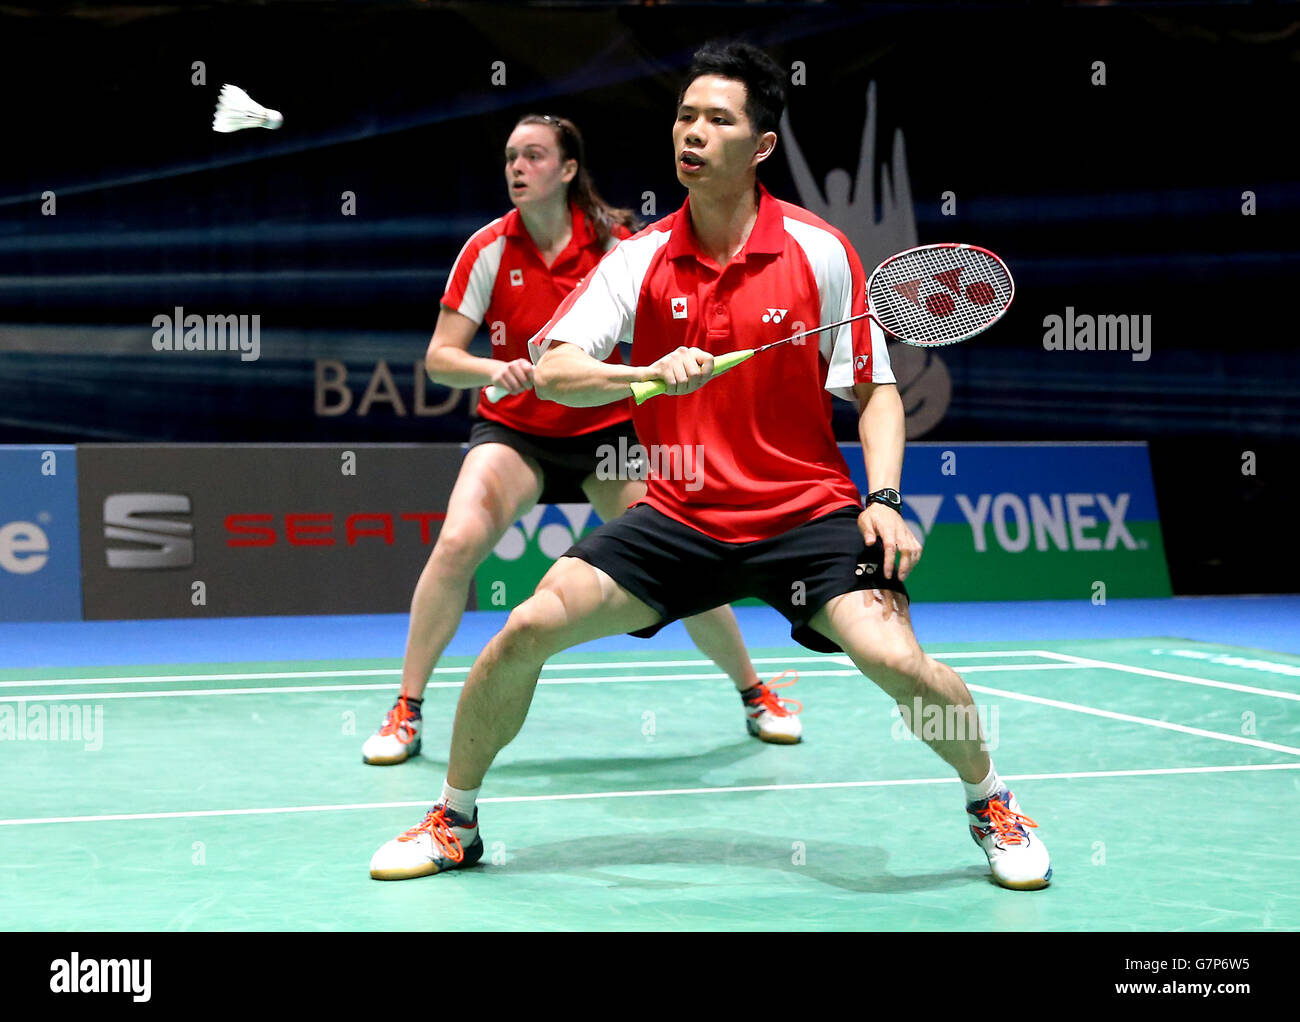 Badminton - 2015 Yonex All England Badminton Championships - Day One - National Indoor Arena. Alex Bruce (left) and Toby Ng, Canada Stock Photo